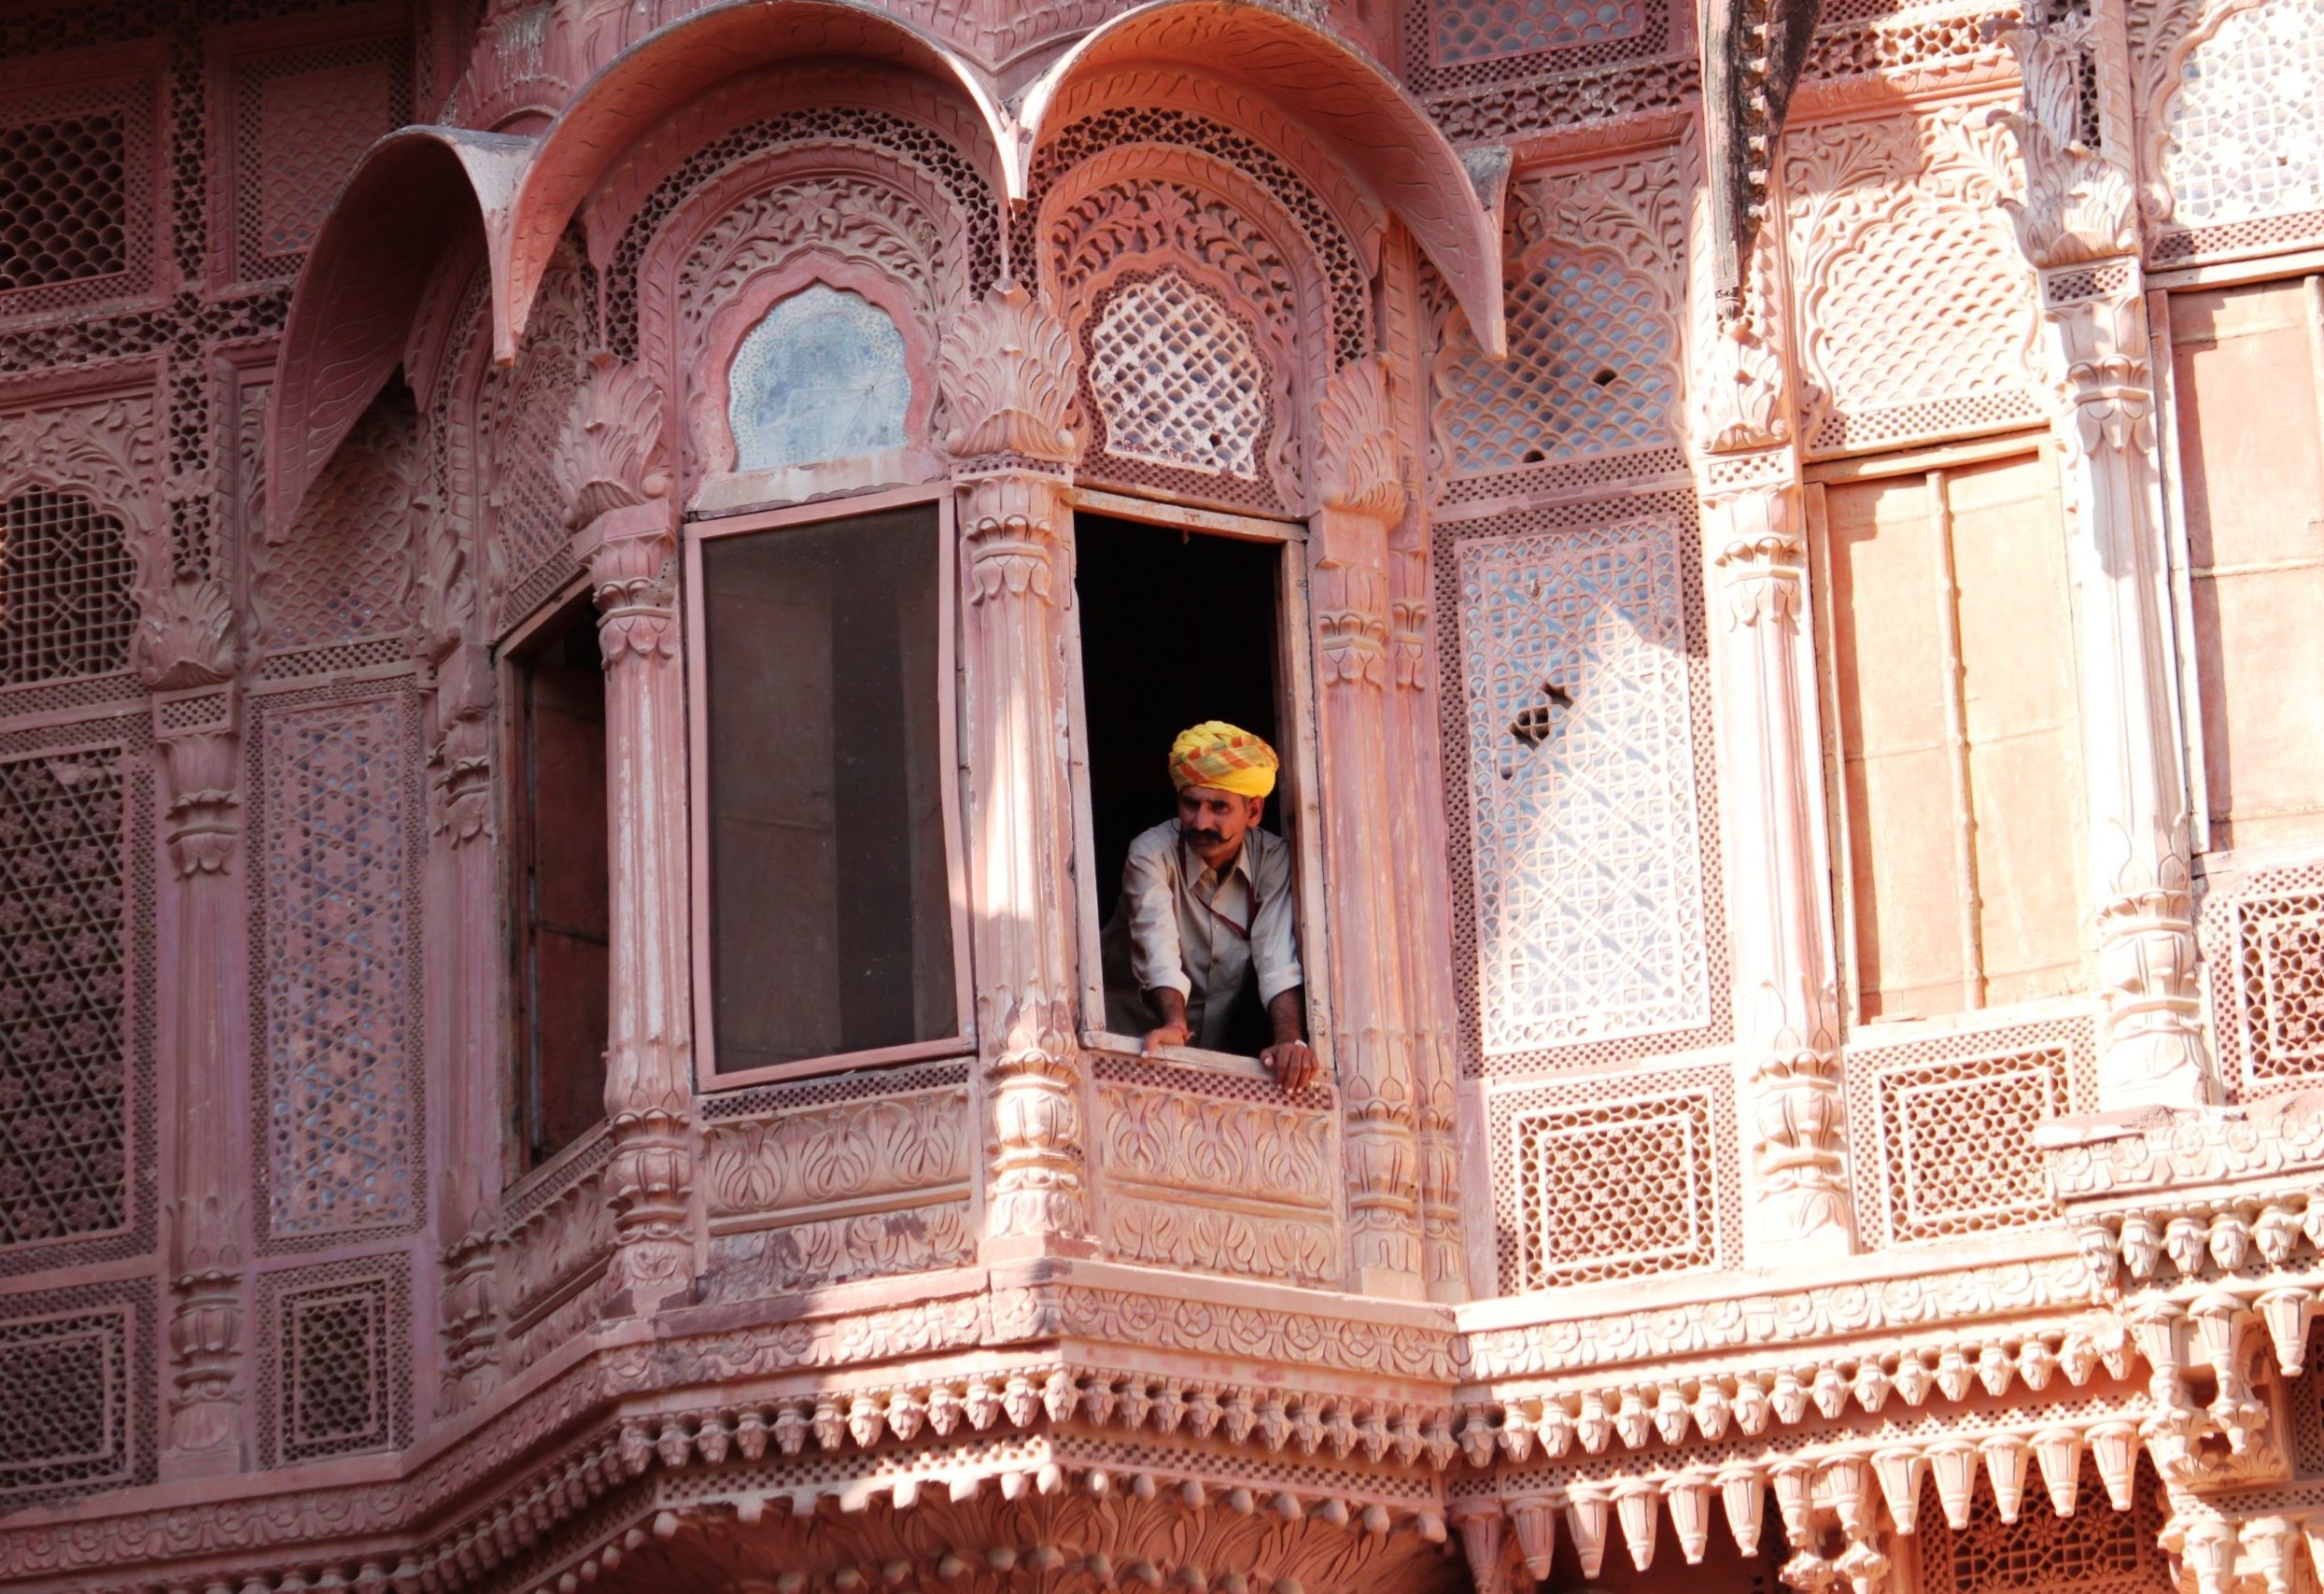 Experience extraordinary Indian architecture like this rose-hued haveli in Jaipur when you take a tailor-made holiday with Alfred&.